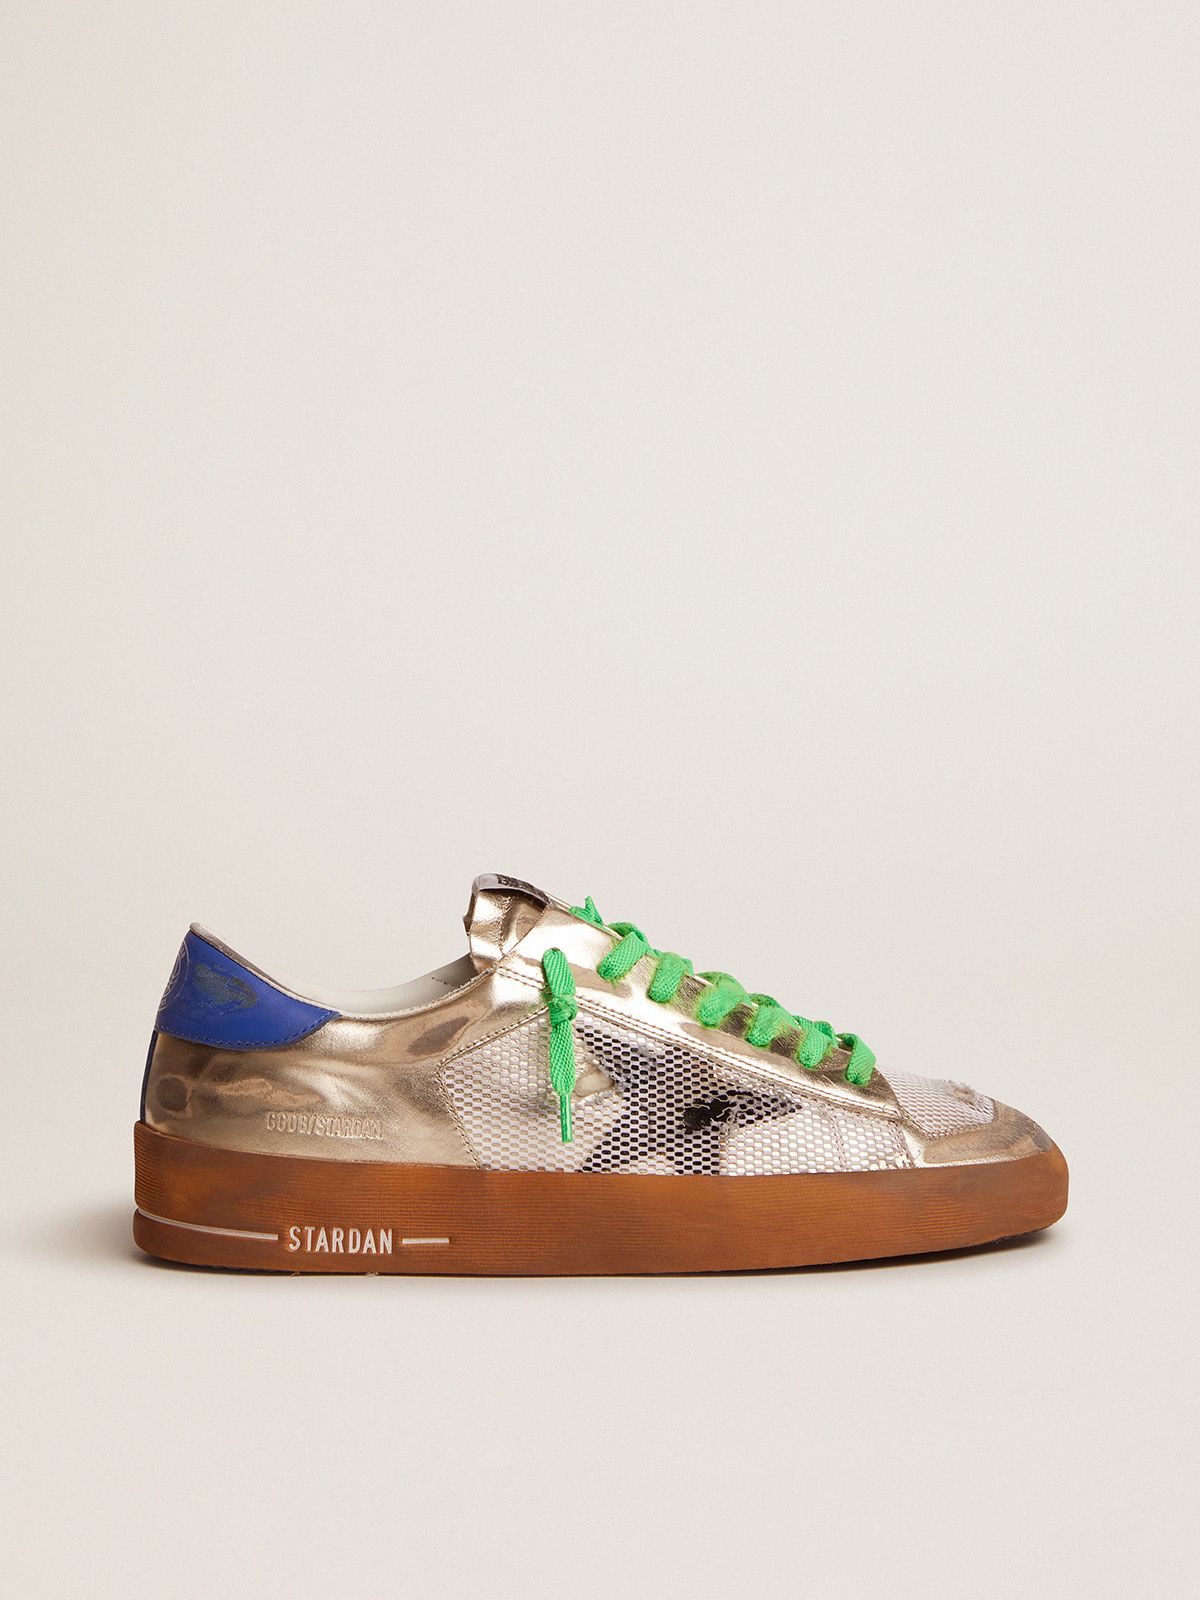 Golden Goose Saldi Uomo Stardan LAB sneakers in laminated leather and mesh with an electric blue heel tab